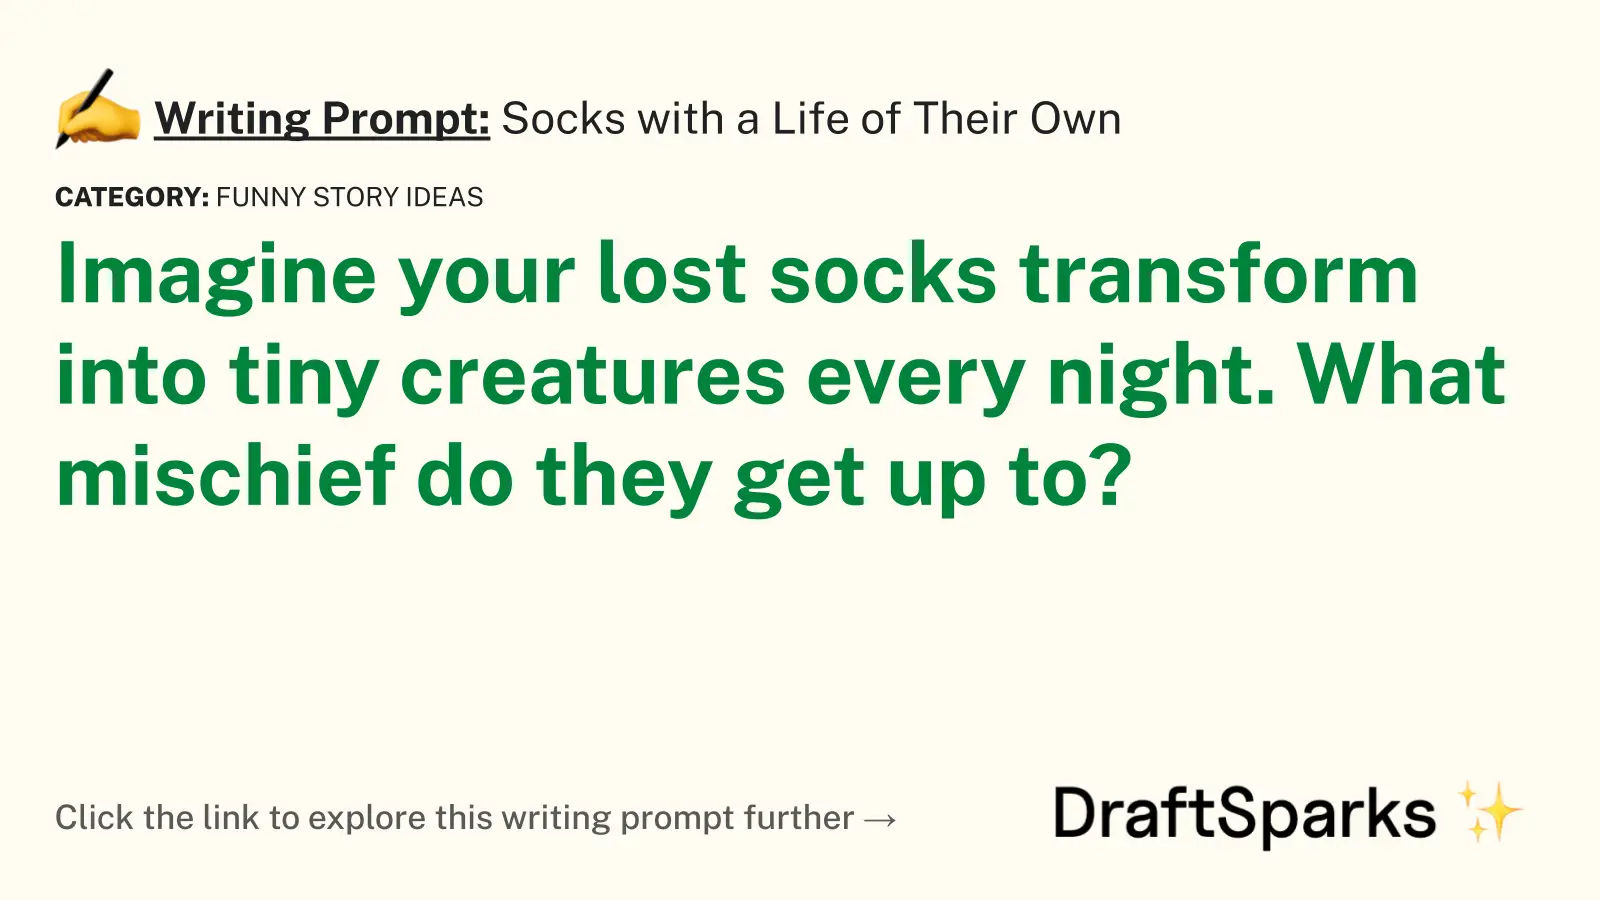 Socks with a Life of Their Own